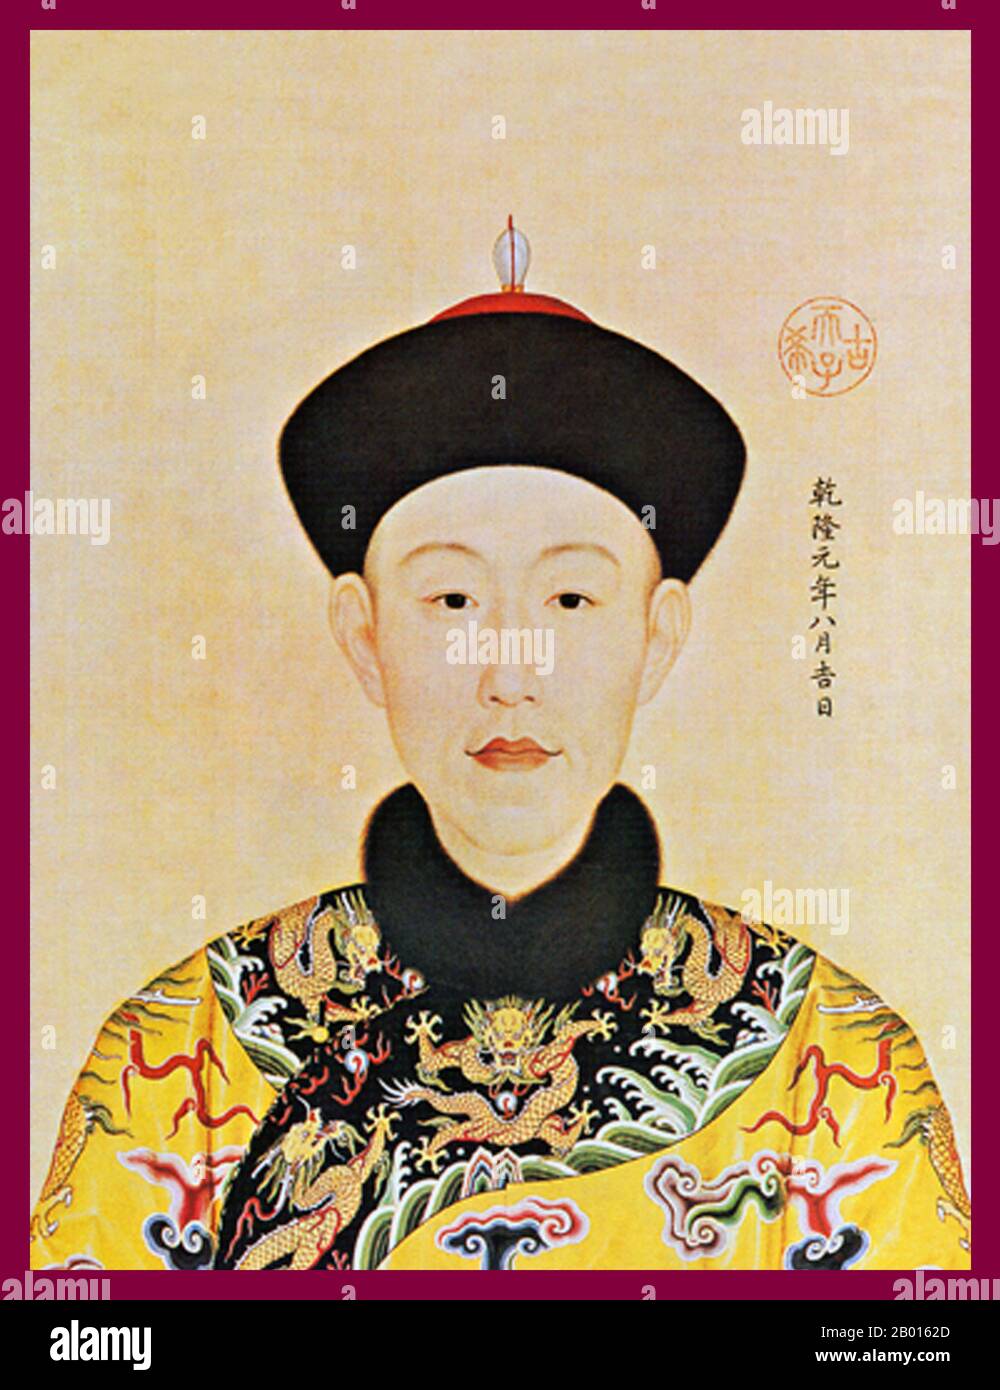 China: The Qianlong Emperor (25 September 1711 - 7 February 1799), during the first year of his reign. Handscroll painting by Giuseppe Castiglione (1688-1766), 1736.  The Qianlong Emperor (25 September 1711 - 7 February 1799), born Hongli and temple name Gaozong, was the fifth emperor of the Qing Dynasty. The fourth son of the Yongzheng Emperor, he reigned officially from 1735 to 1796, before abdicating in favor of his son, the Jiaqing Emperor - a filial act to not rule longer than his grandfather, the Kangxi Emperor. Despite his retirement, he retained ultimate power until his death. Stock Photo